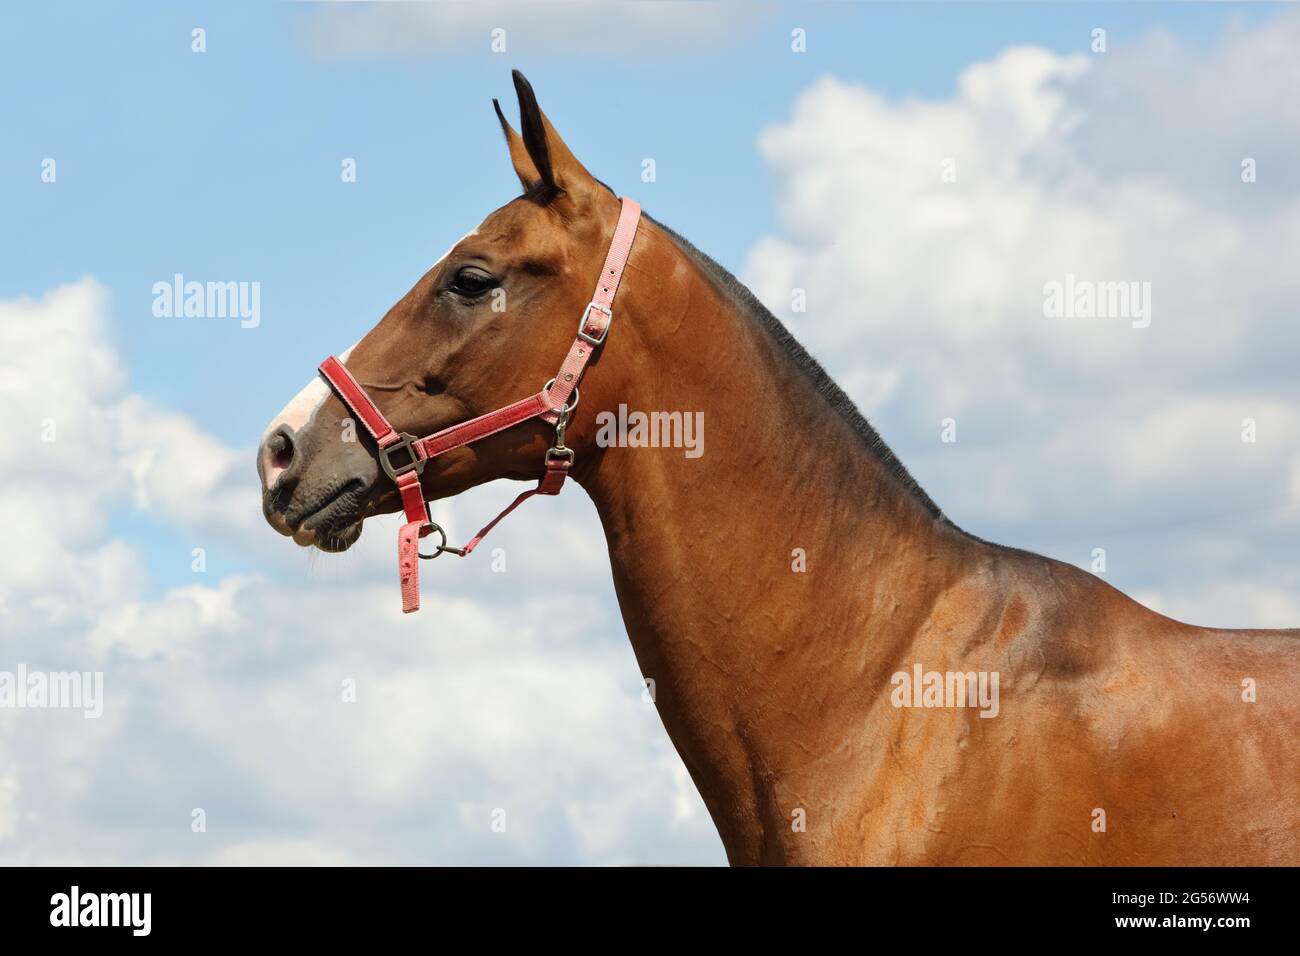 Young aristocratic bay stallion of Akhal Teke horse breed from Turkmenistan, standing in a paddock, wooden poles Stock Photo